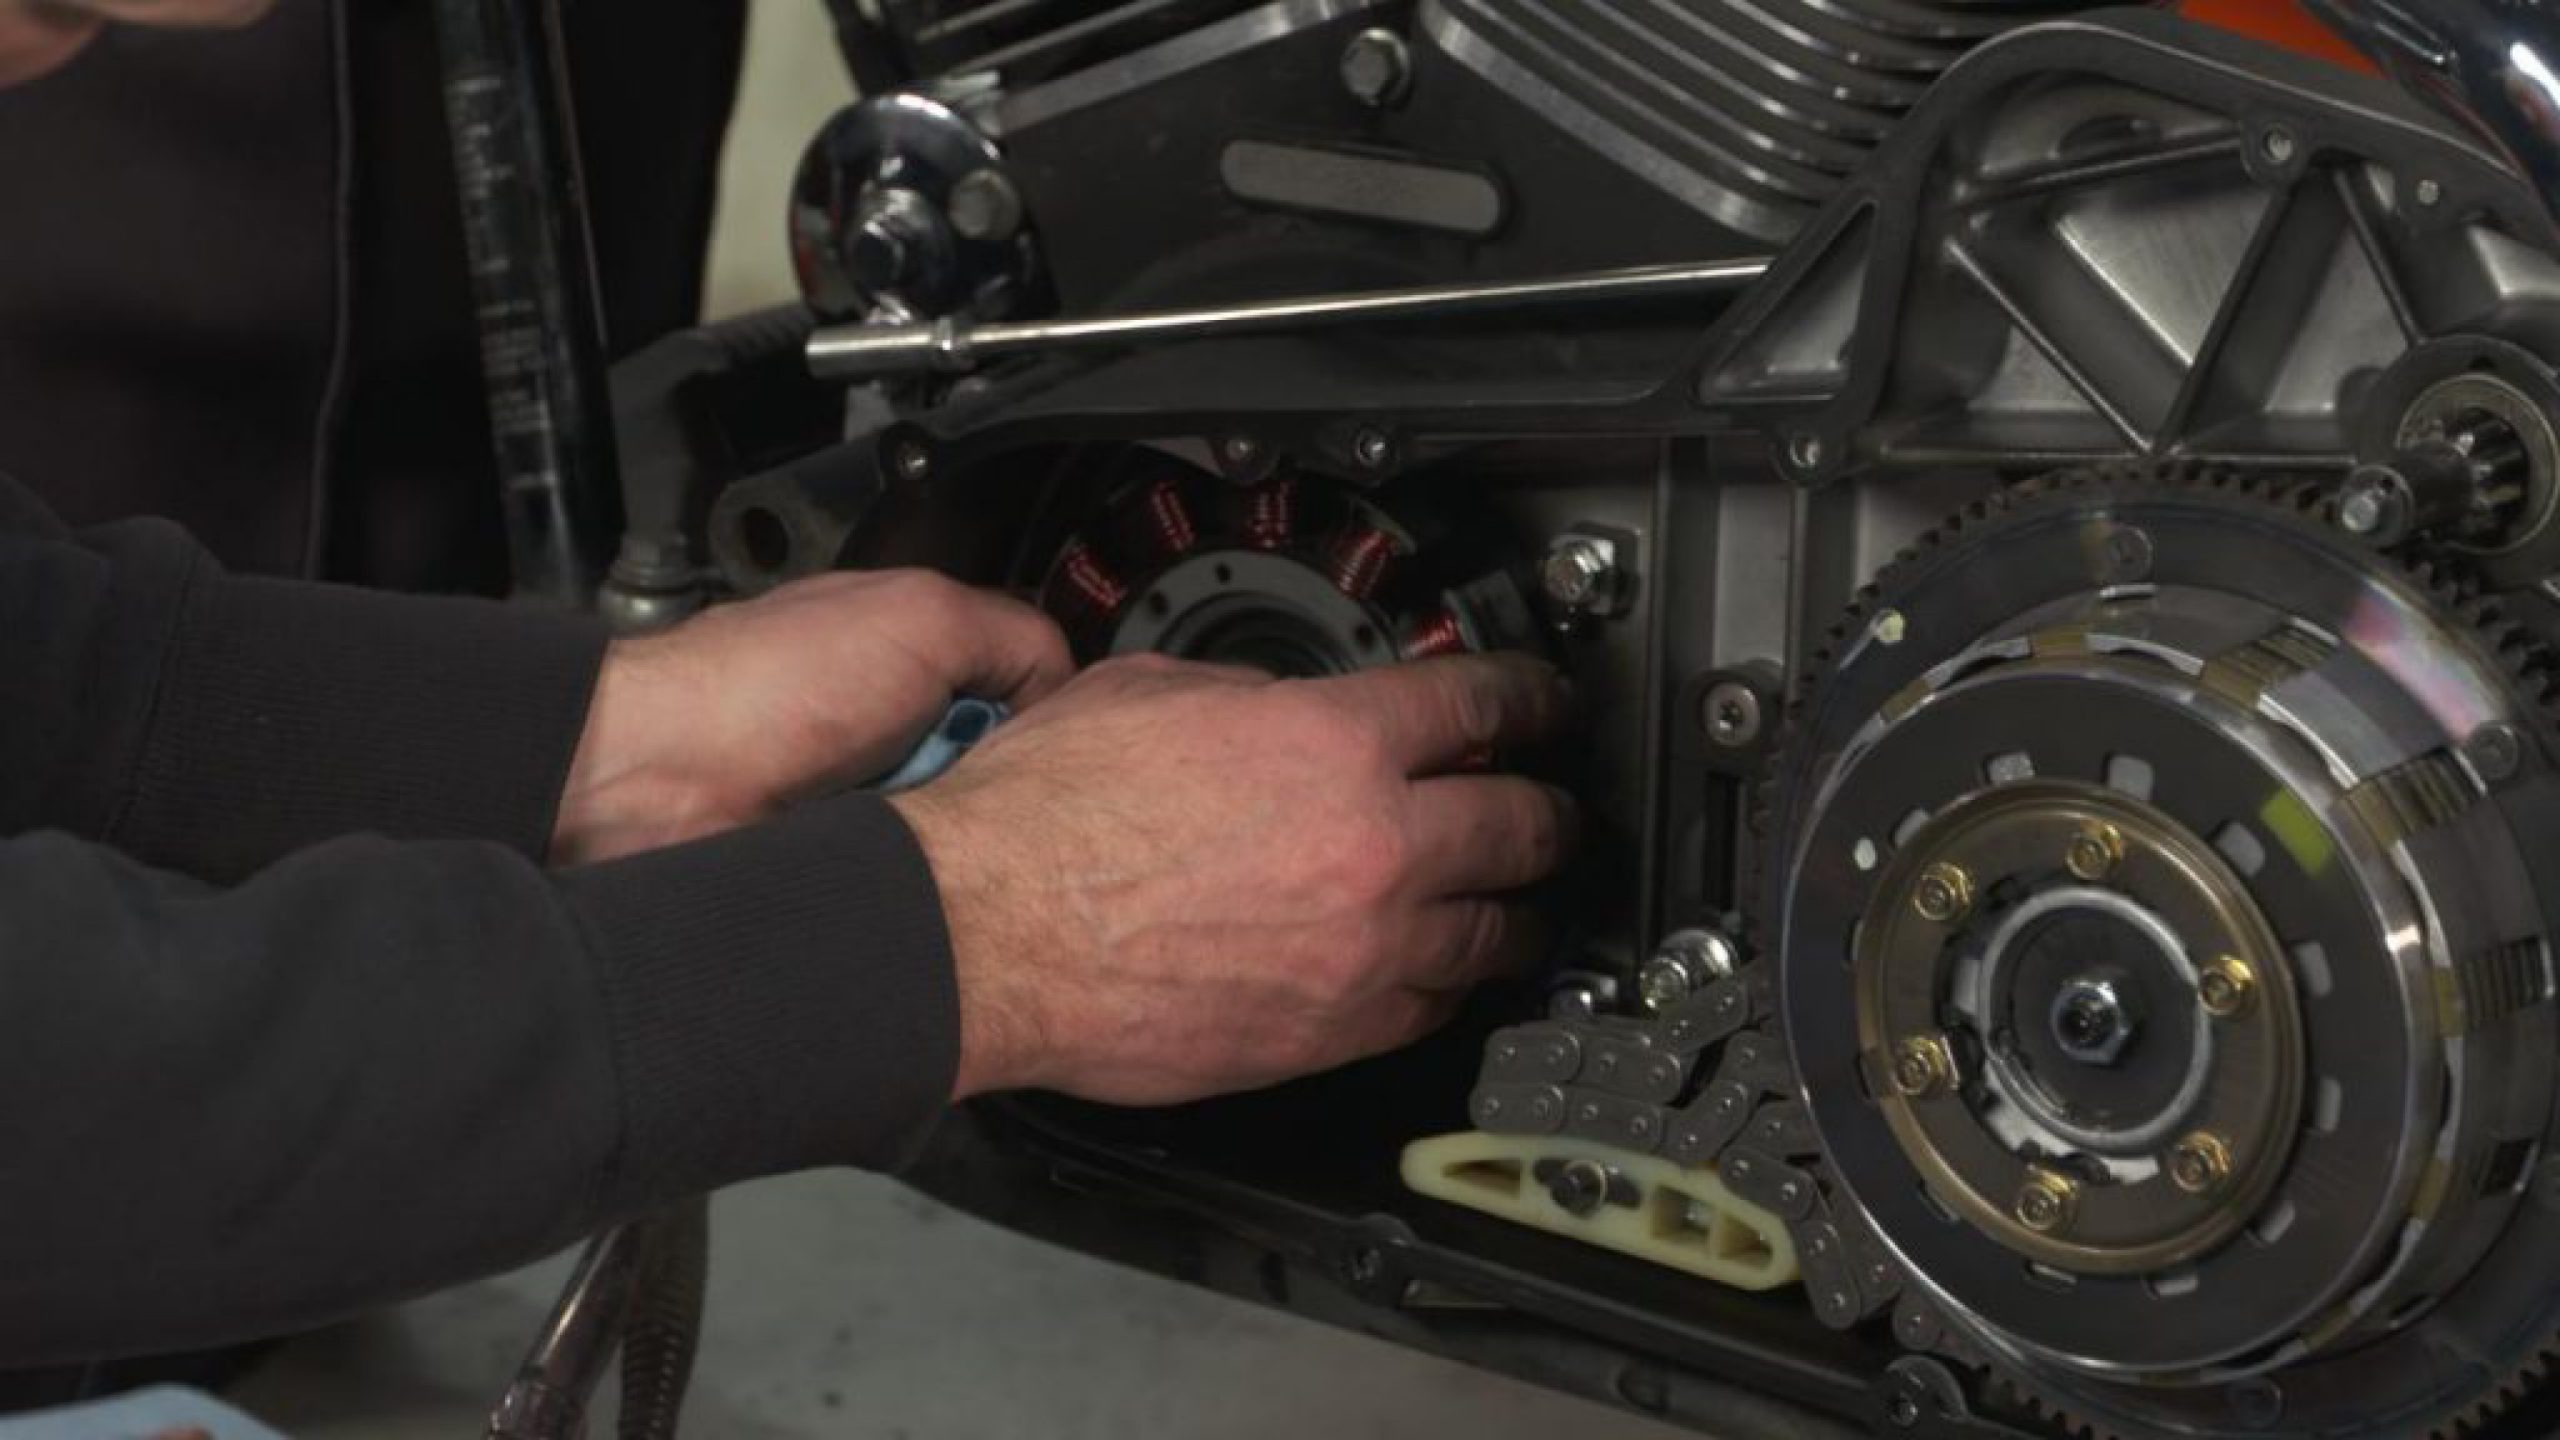 Tips for When Your Harley Won't Start - Intermittent Starting Problem